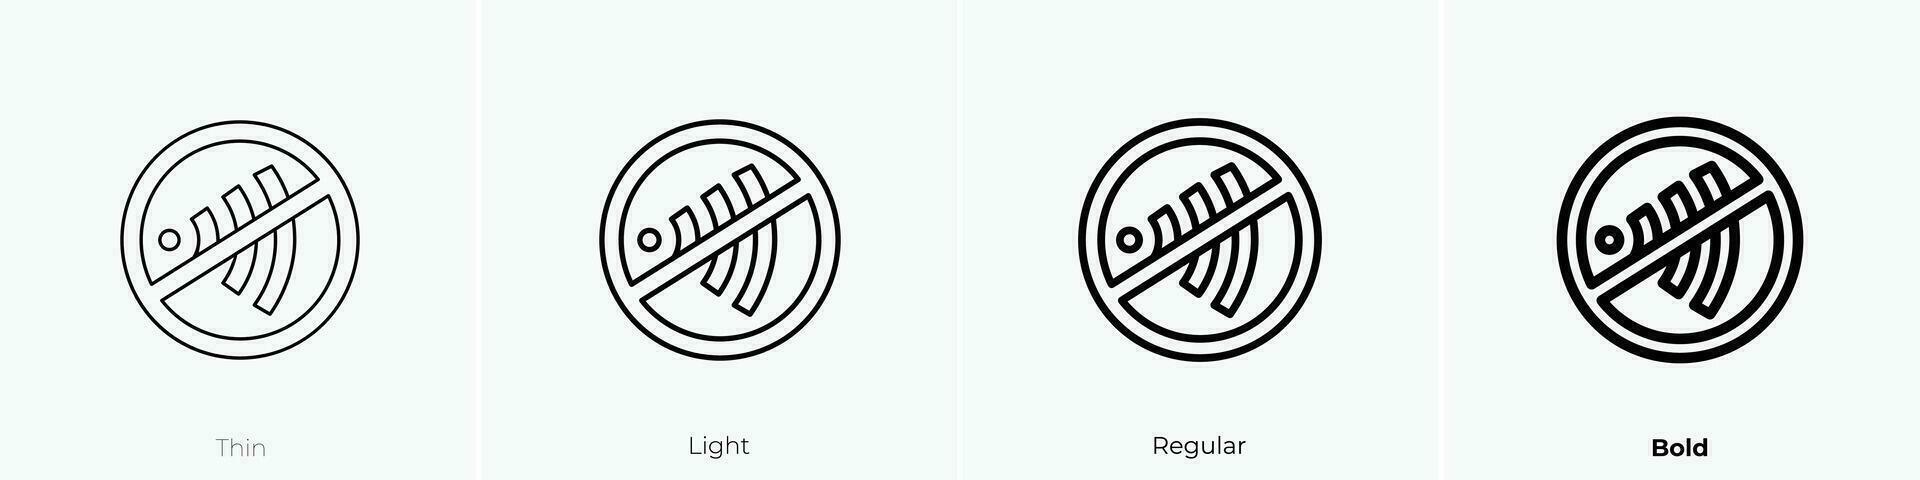 sign icon. Thin, Light, Regular And Bold style design isolated on white background vector